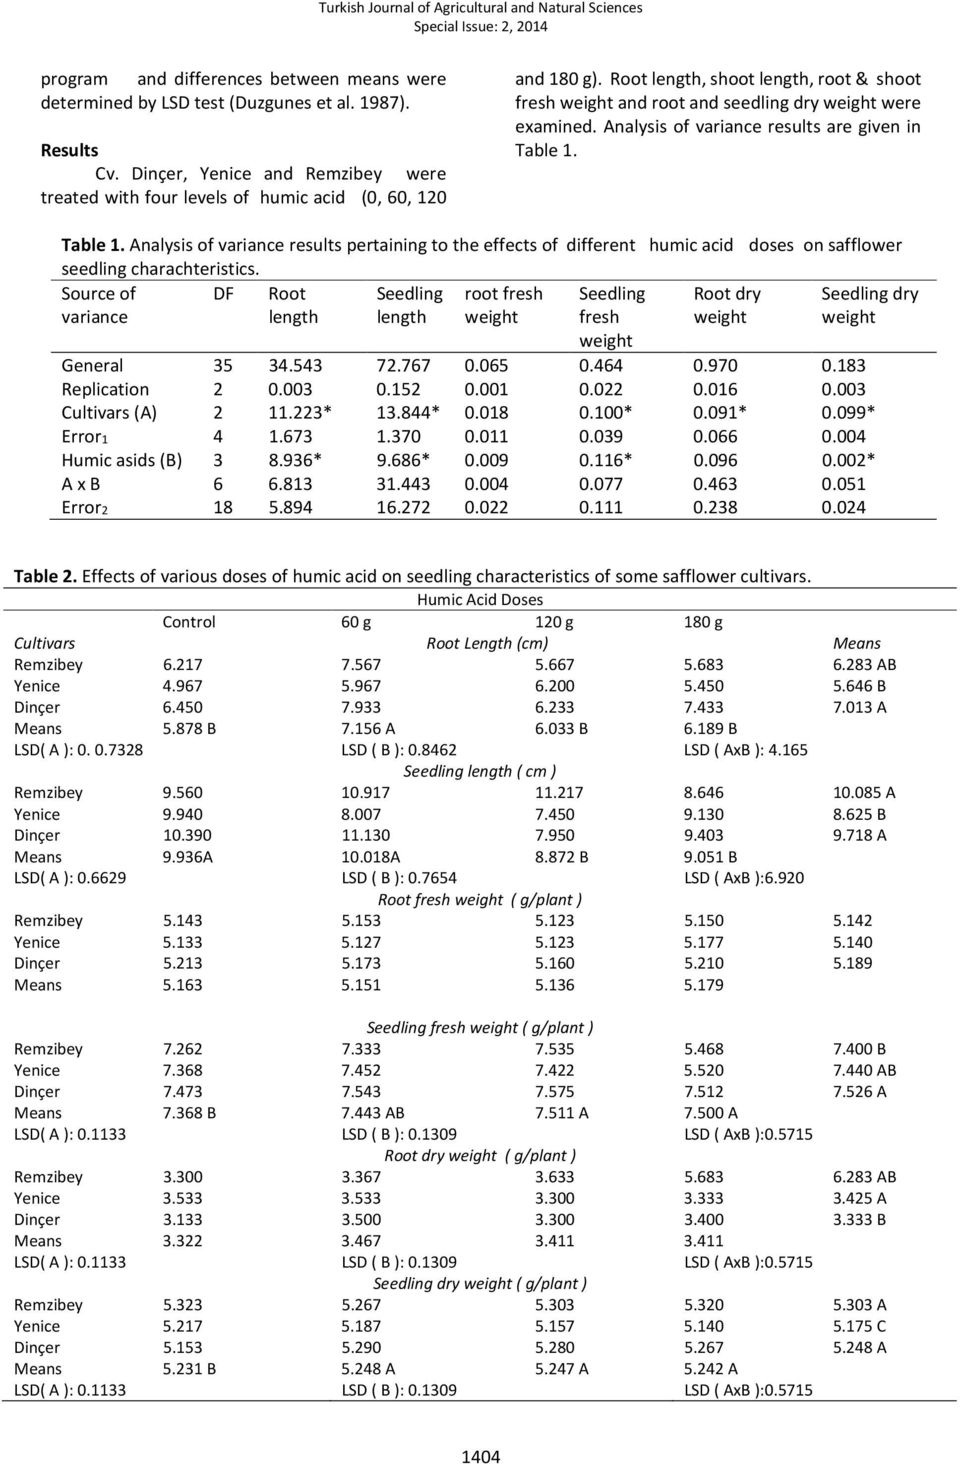 Table 1. Analysis of variance results pertaining to the effects of different humic acid doses on safflower seedling charachteristics.